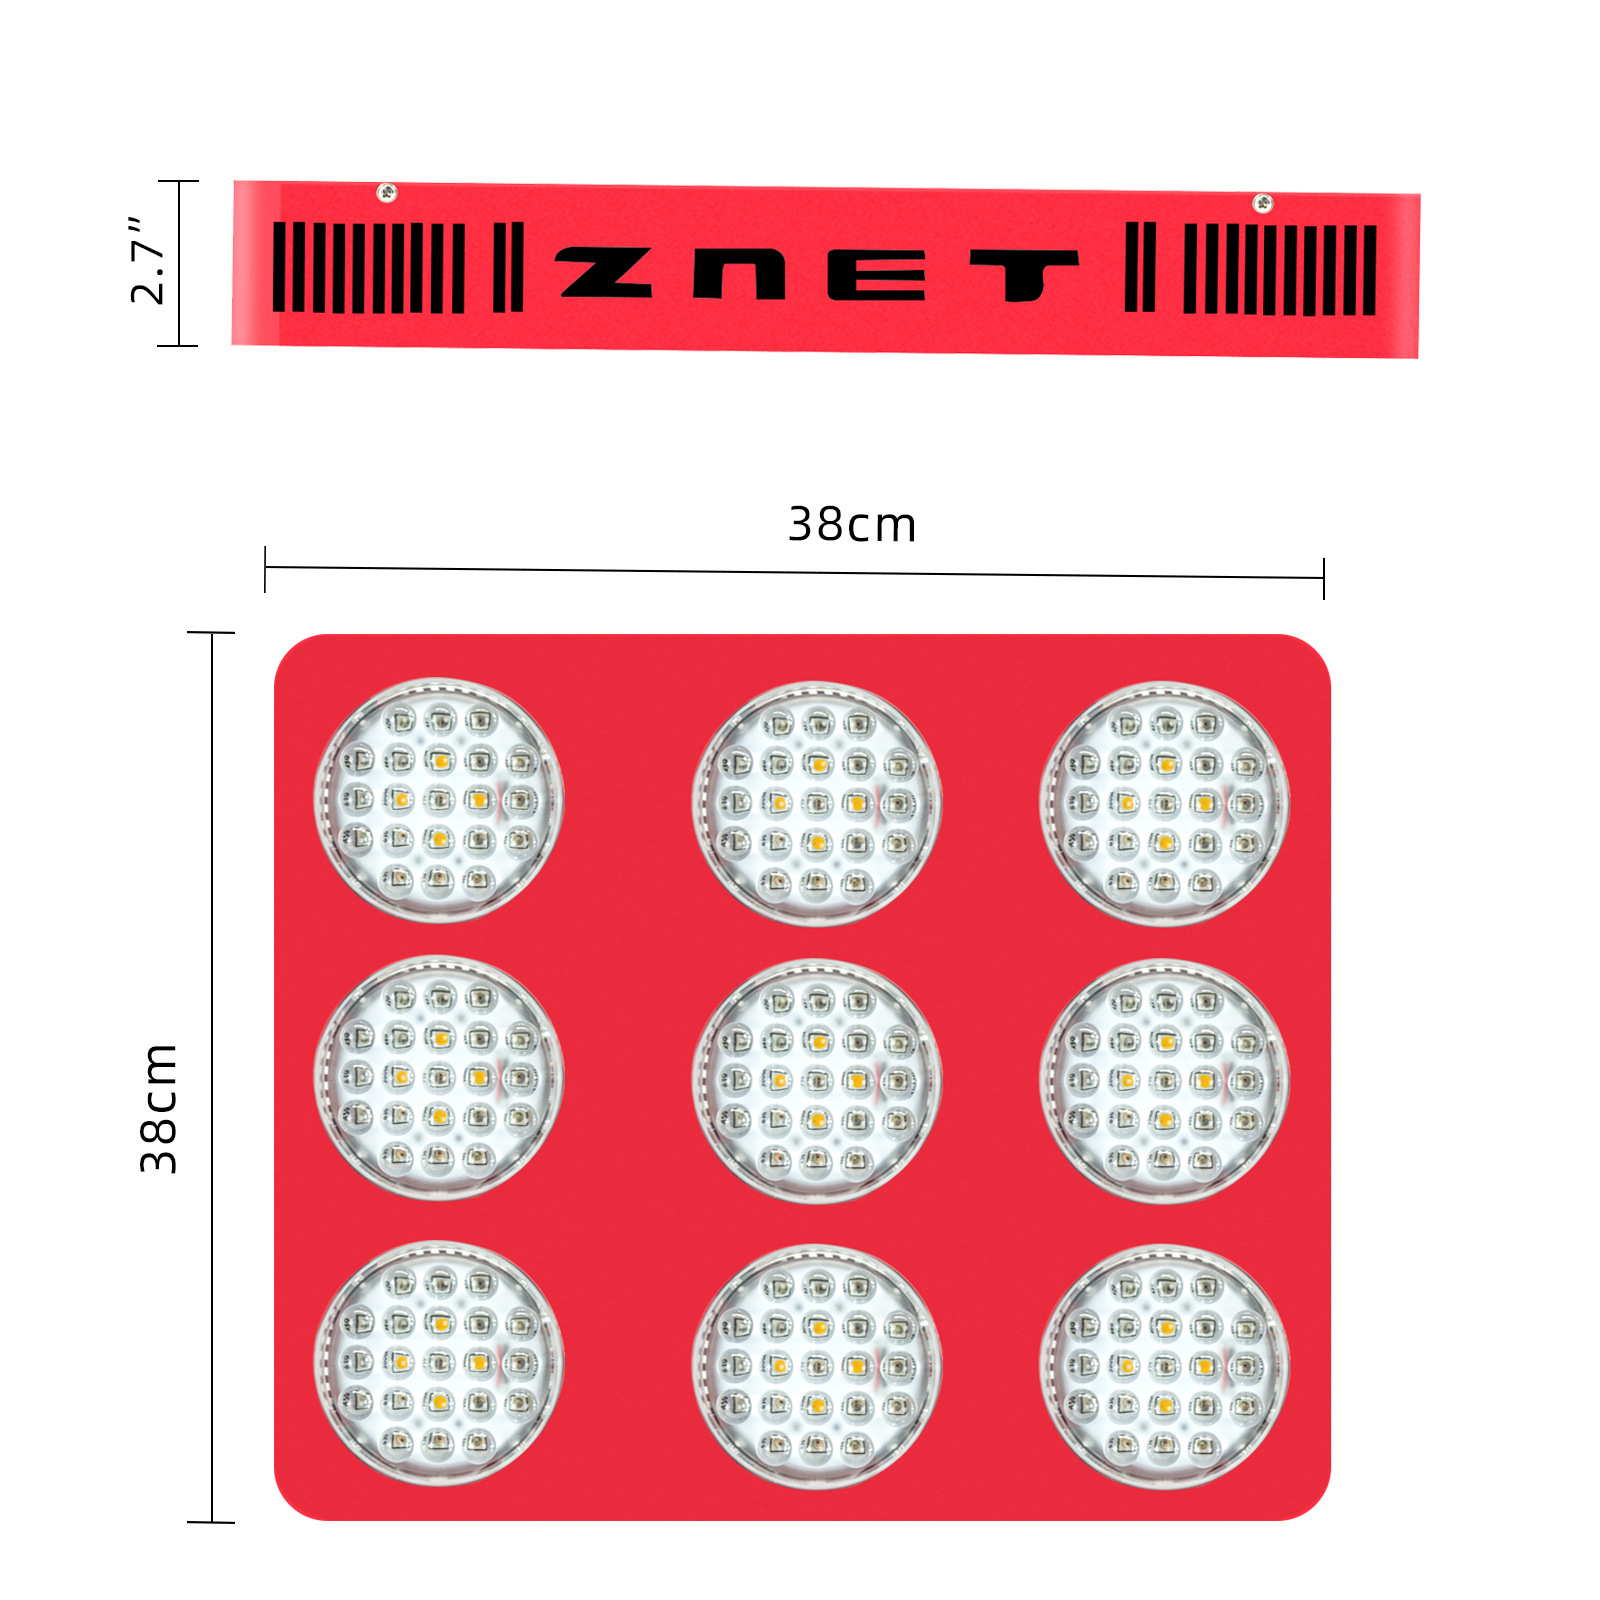 Z9 Led Professional Indoor Plant Grow Light Apollo9 Growing Flowering Dual-Mode Plant Lamp